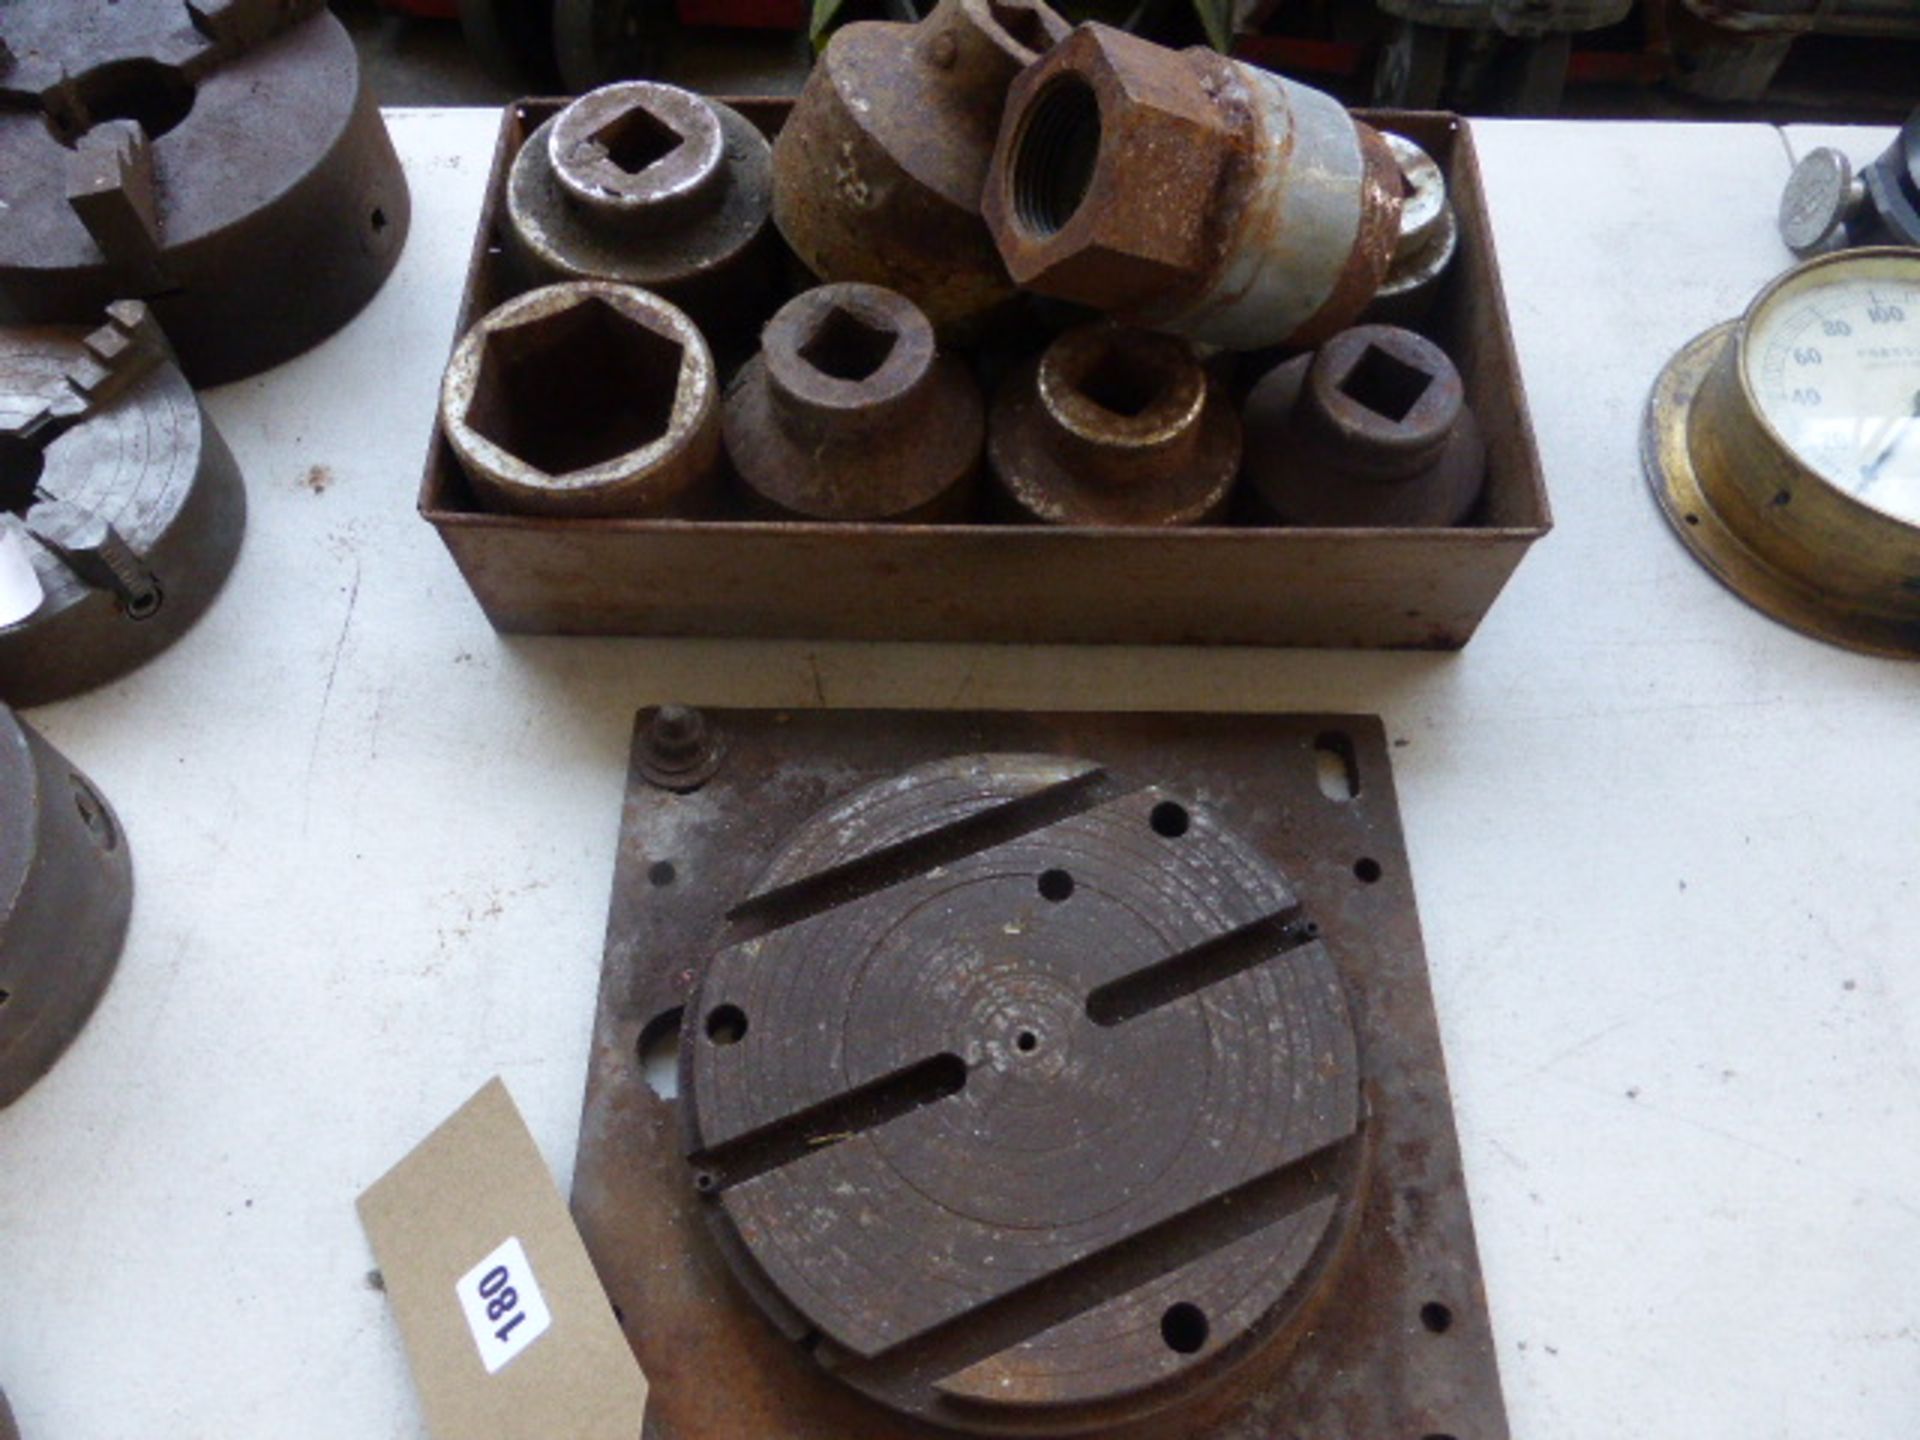 Metal tray containing 8 large sockets plus a small 8'' rotating table